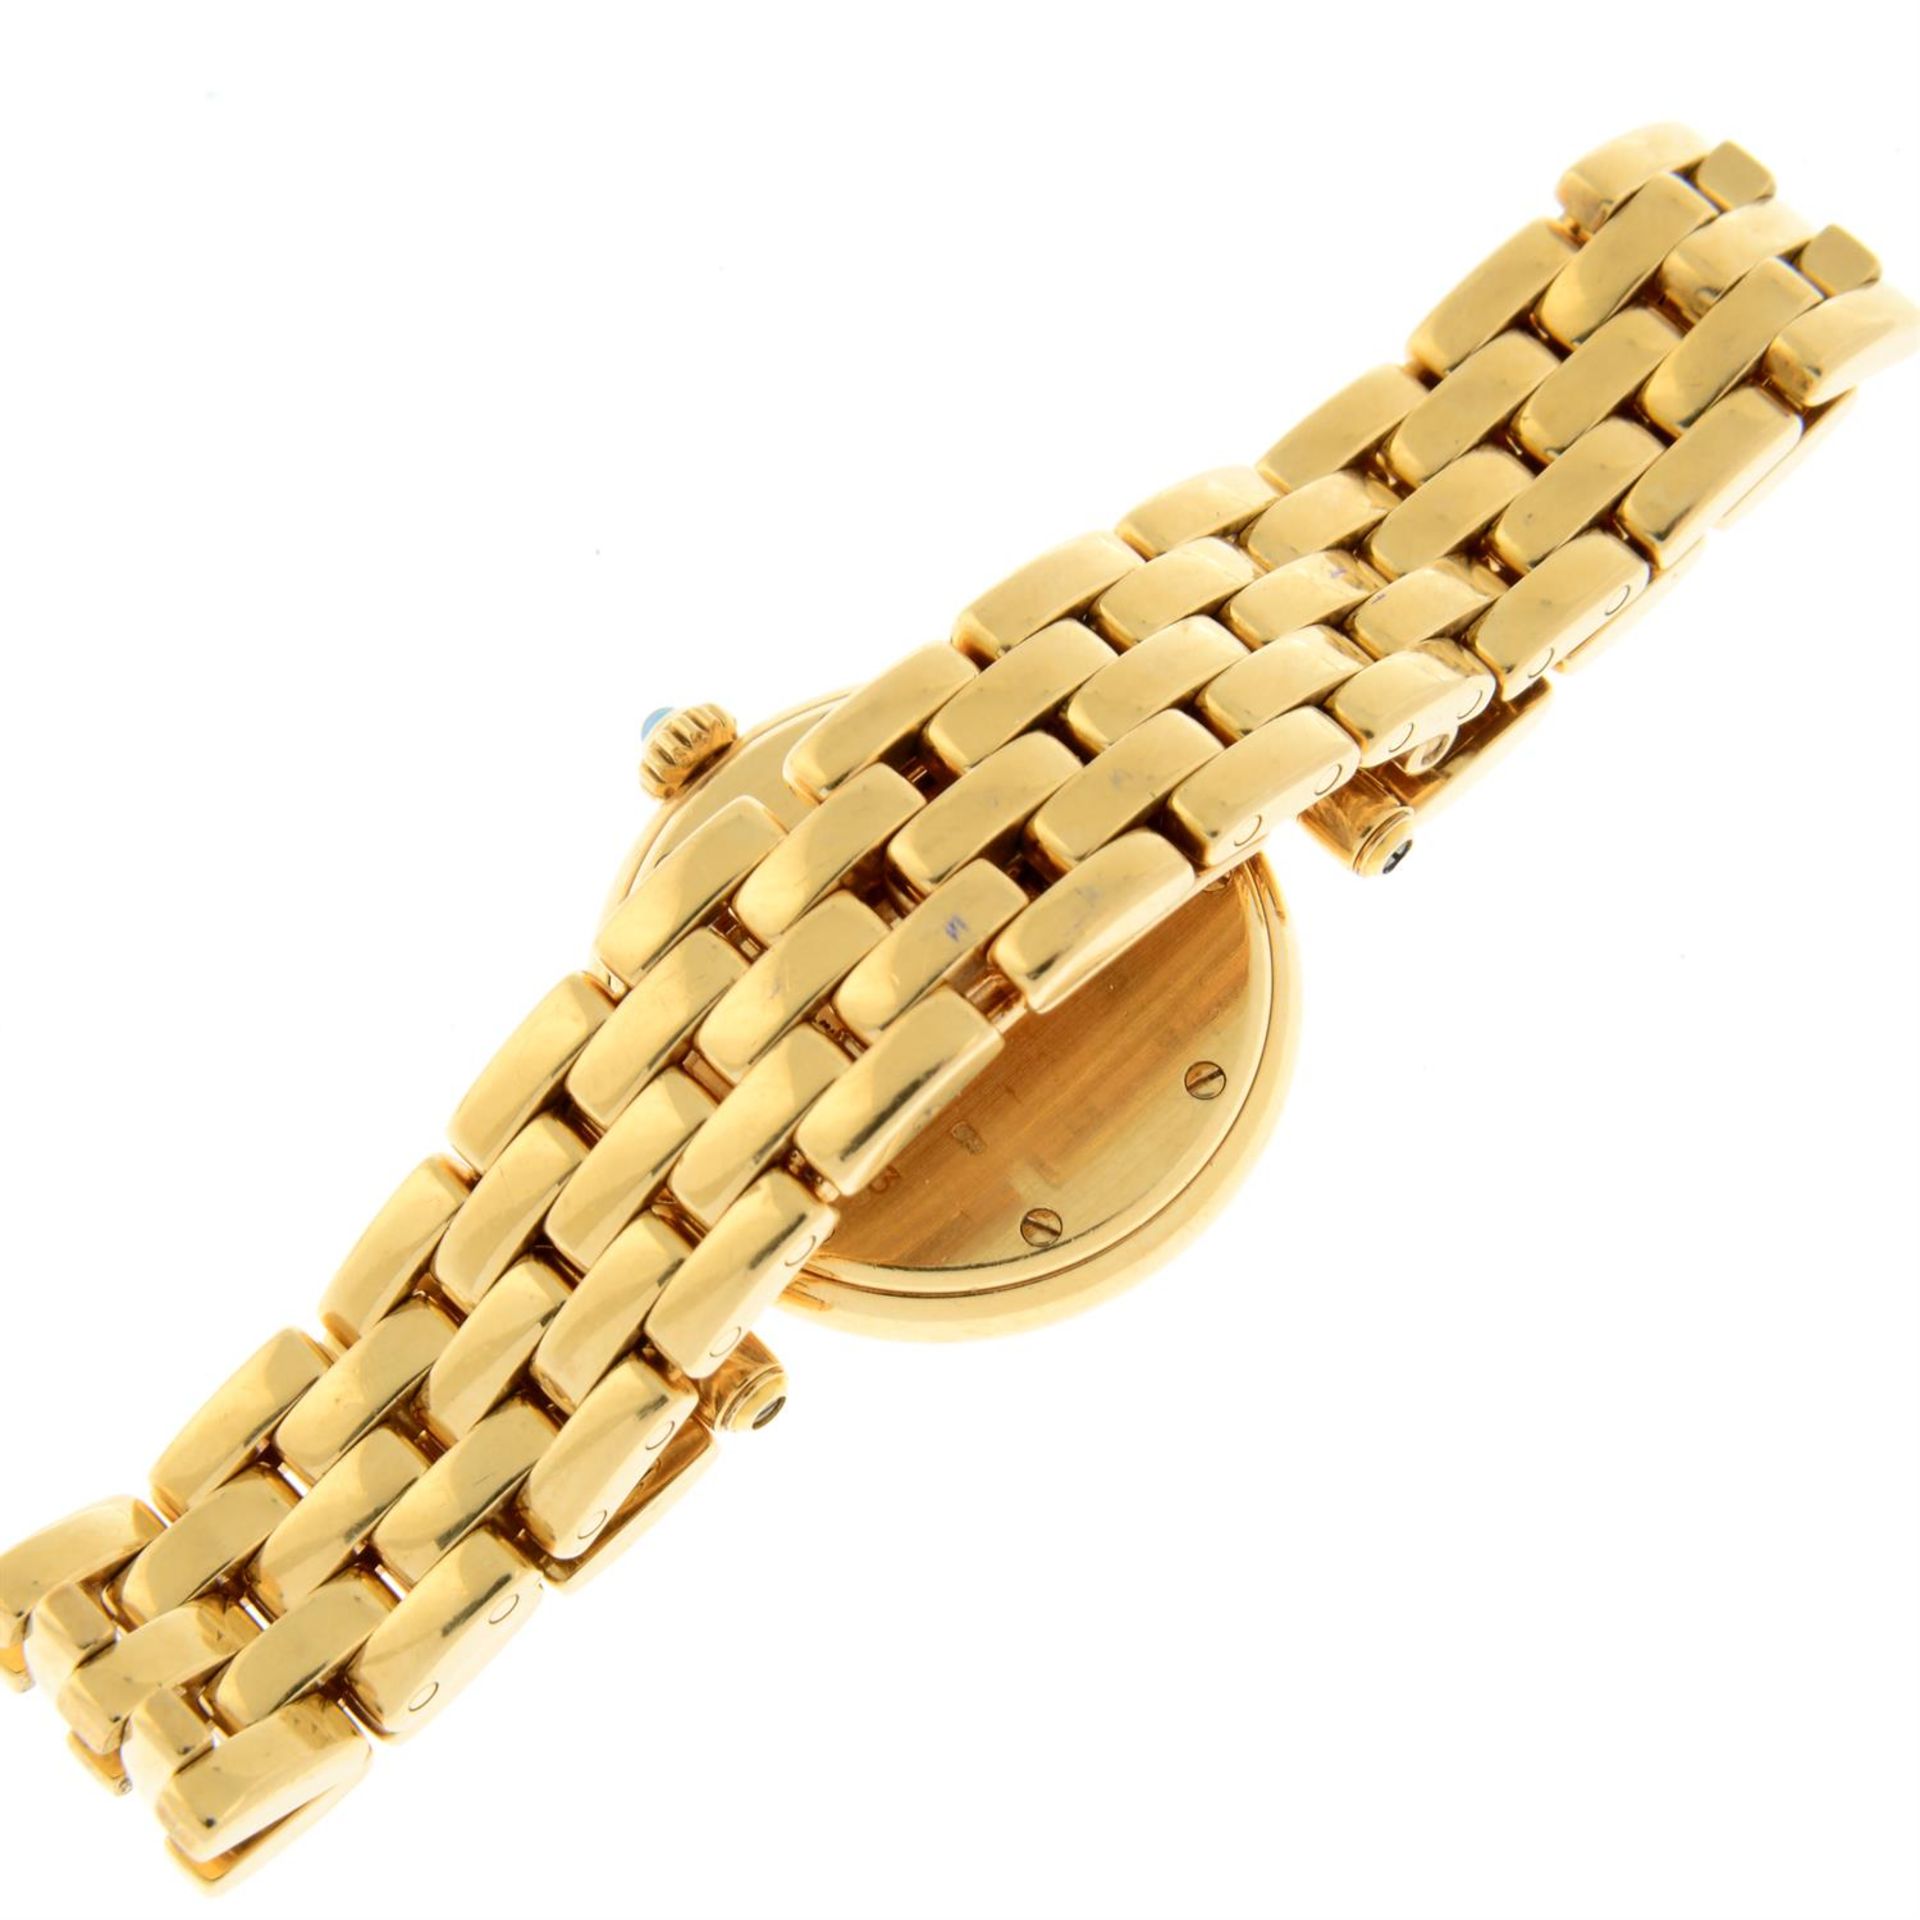 CARTIER - an 18ct yellow gold Panthere Vendome bracelet watch, 24mm. - Image 2 of 5